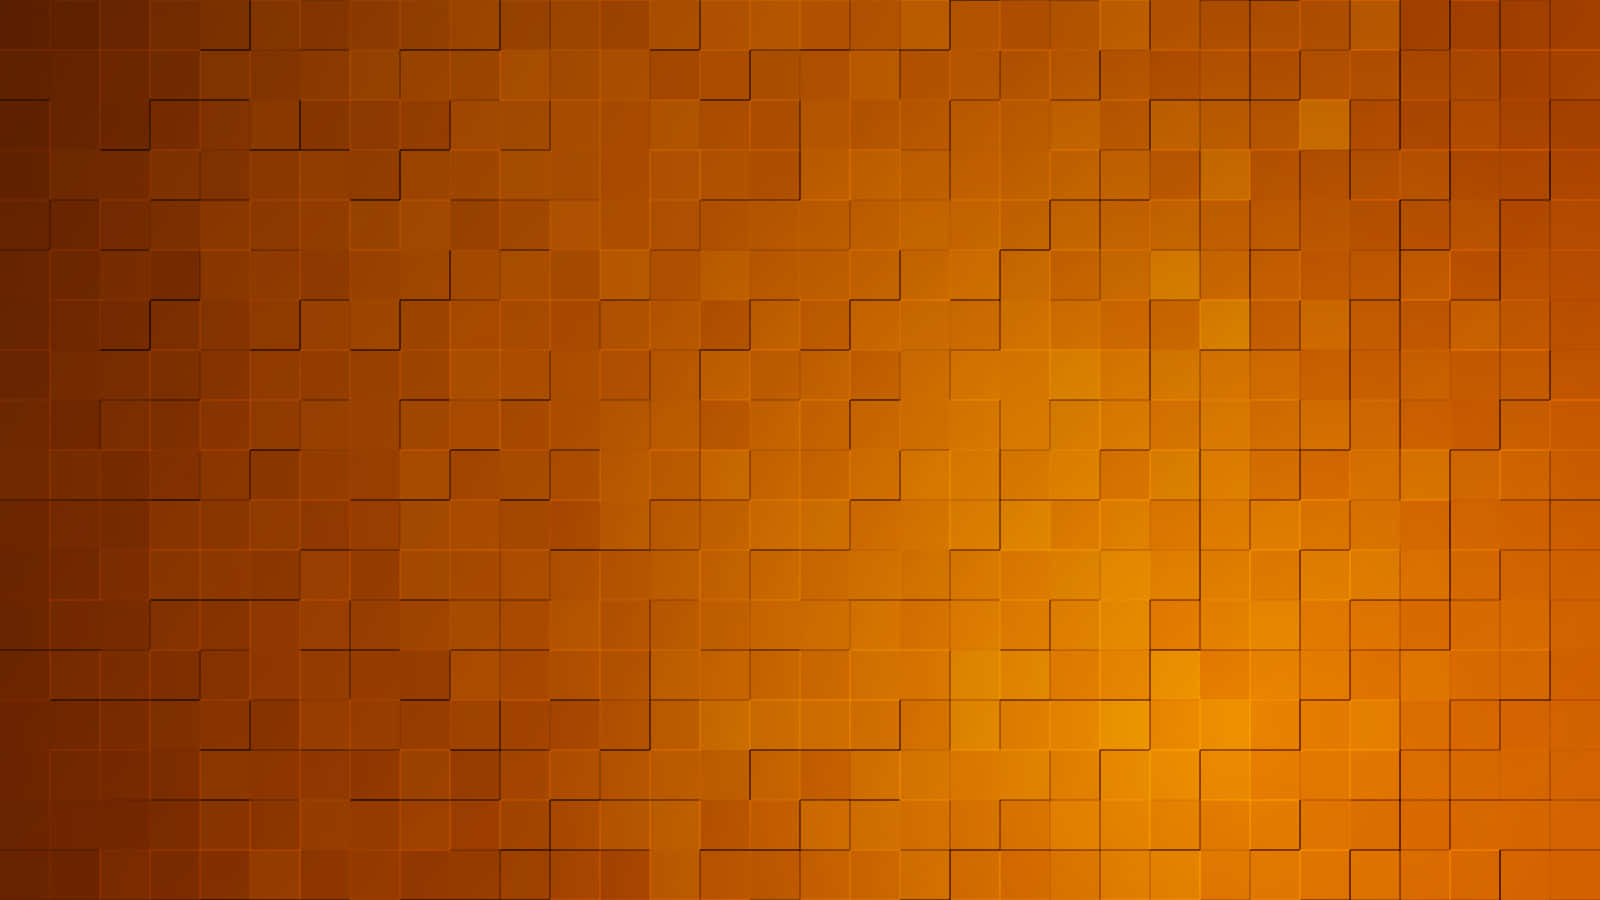 Brighten up your day with the vibrant orange of Cool Orange! Wallpaper